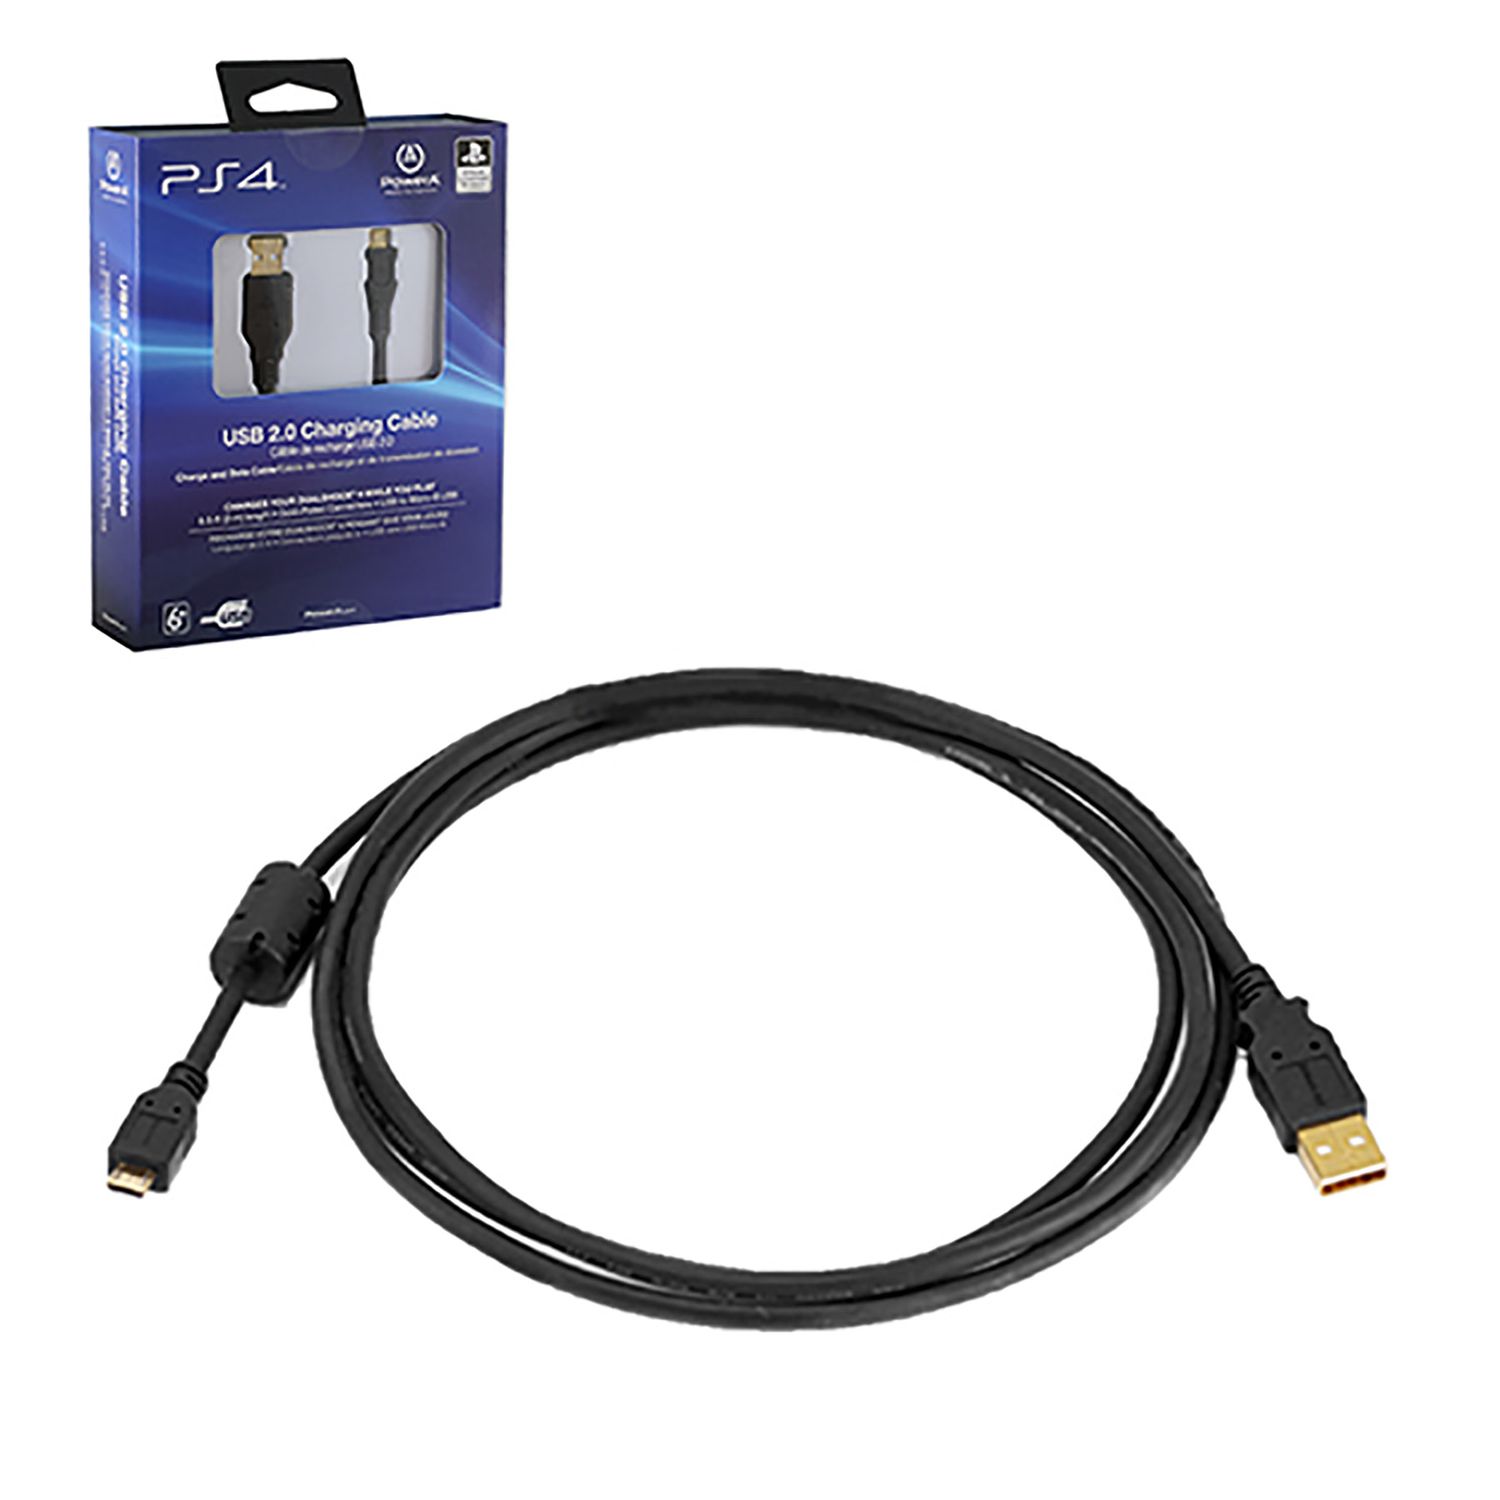 Oh Periodo perioperatorio asistente PowerA USB Charge Cable for PlayStation 4 Black CPFA122462-02 - Best Buy